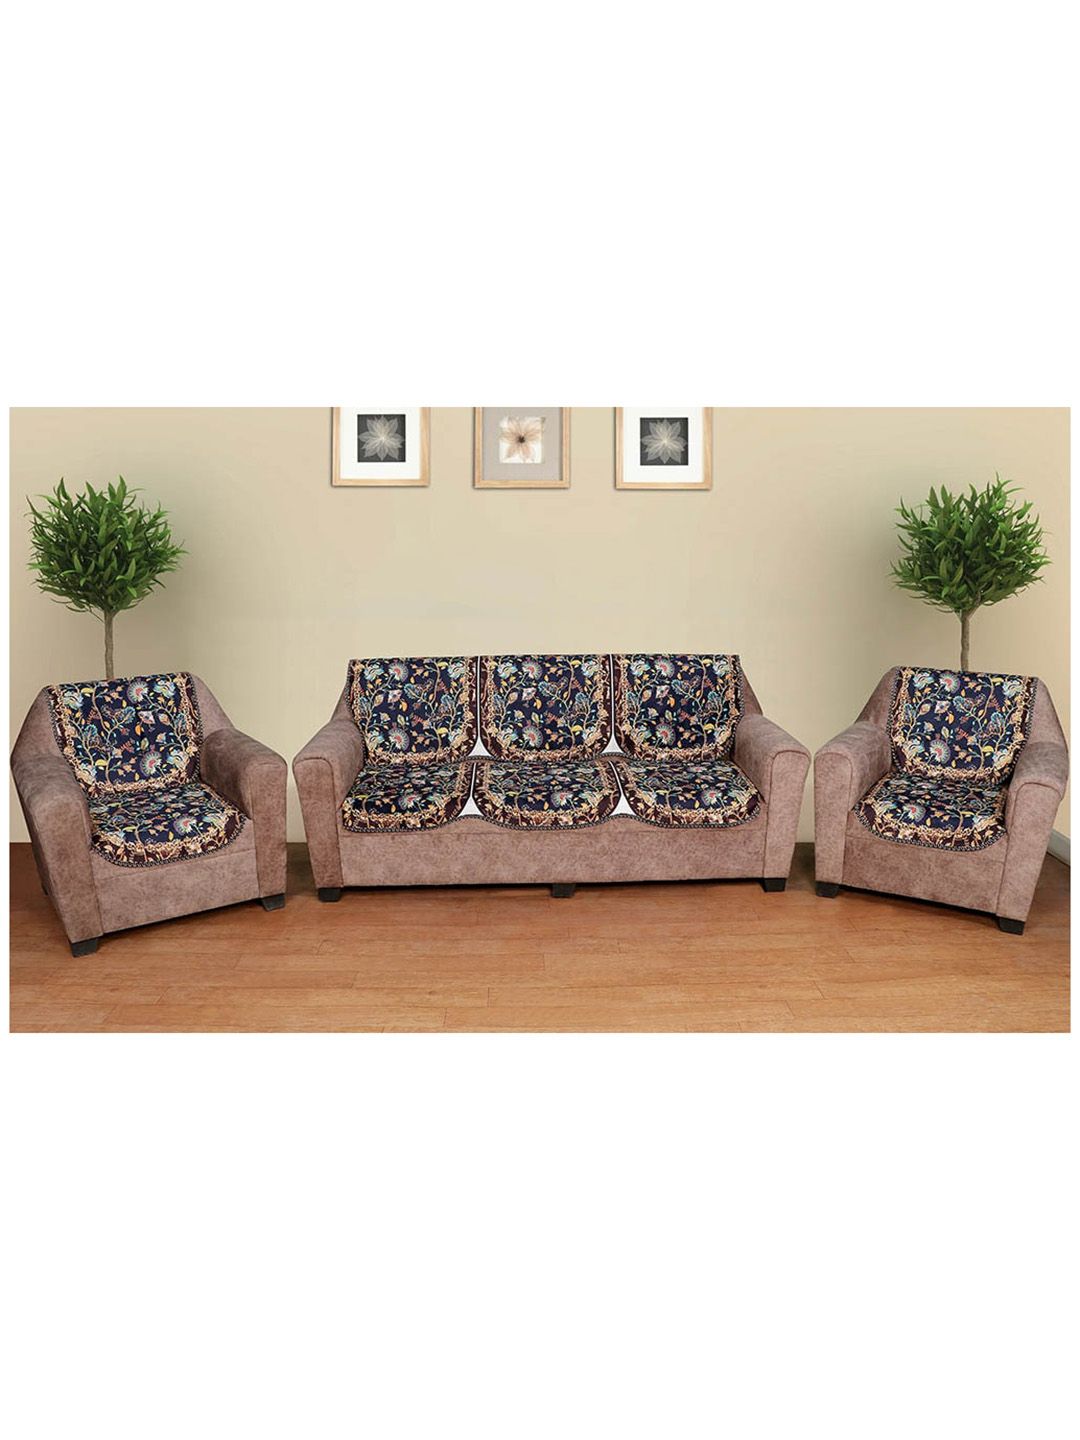 AAZEEM Blue & Brown Printed 5-Seater Sofa Cover Price in India